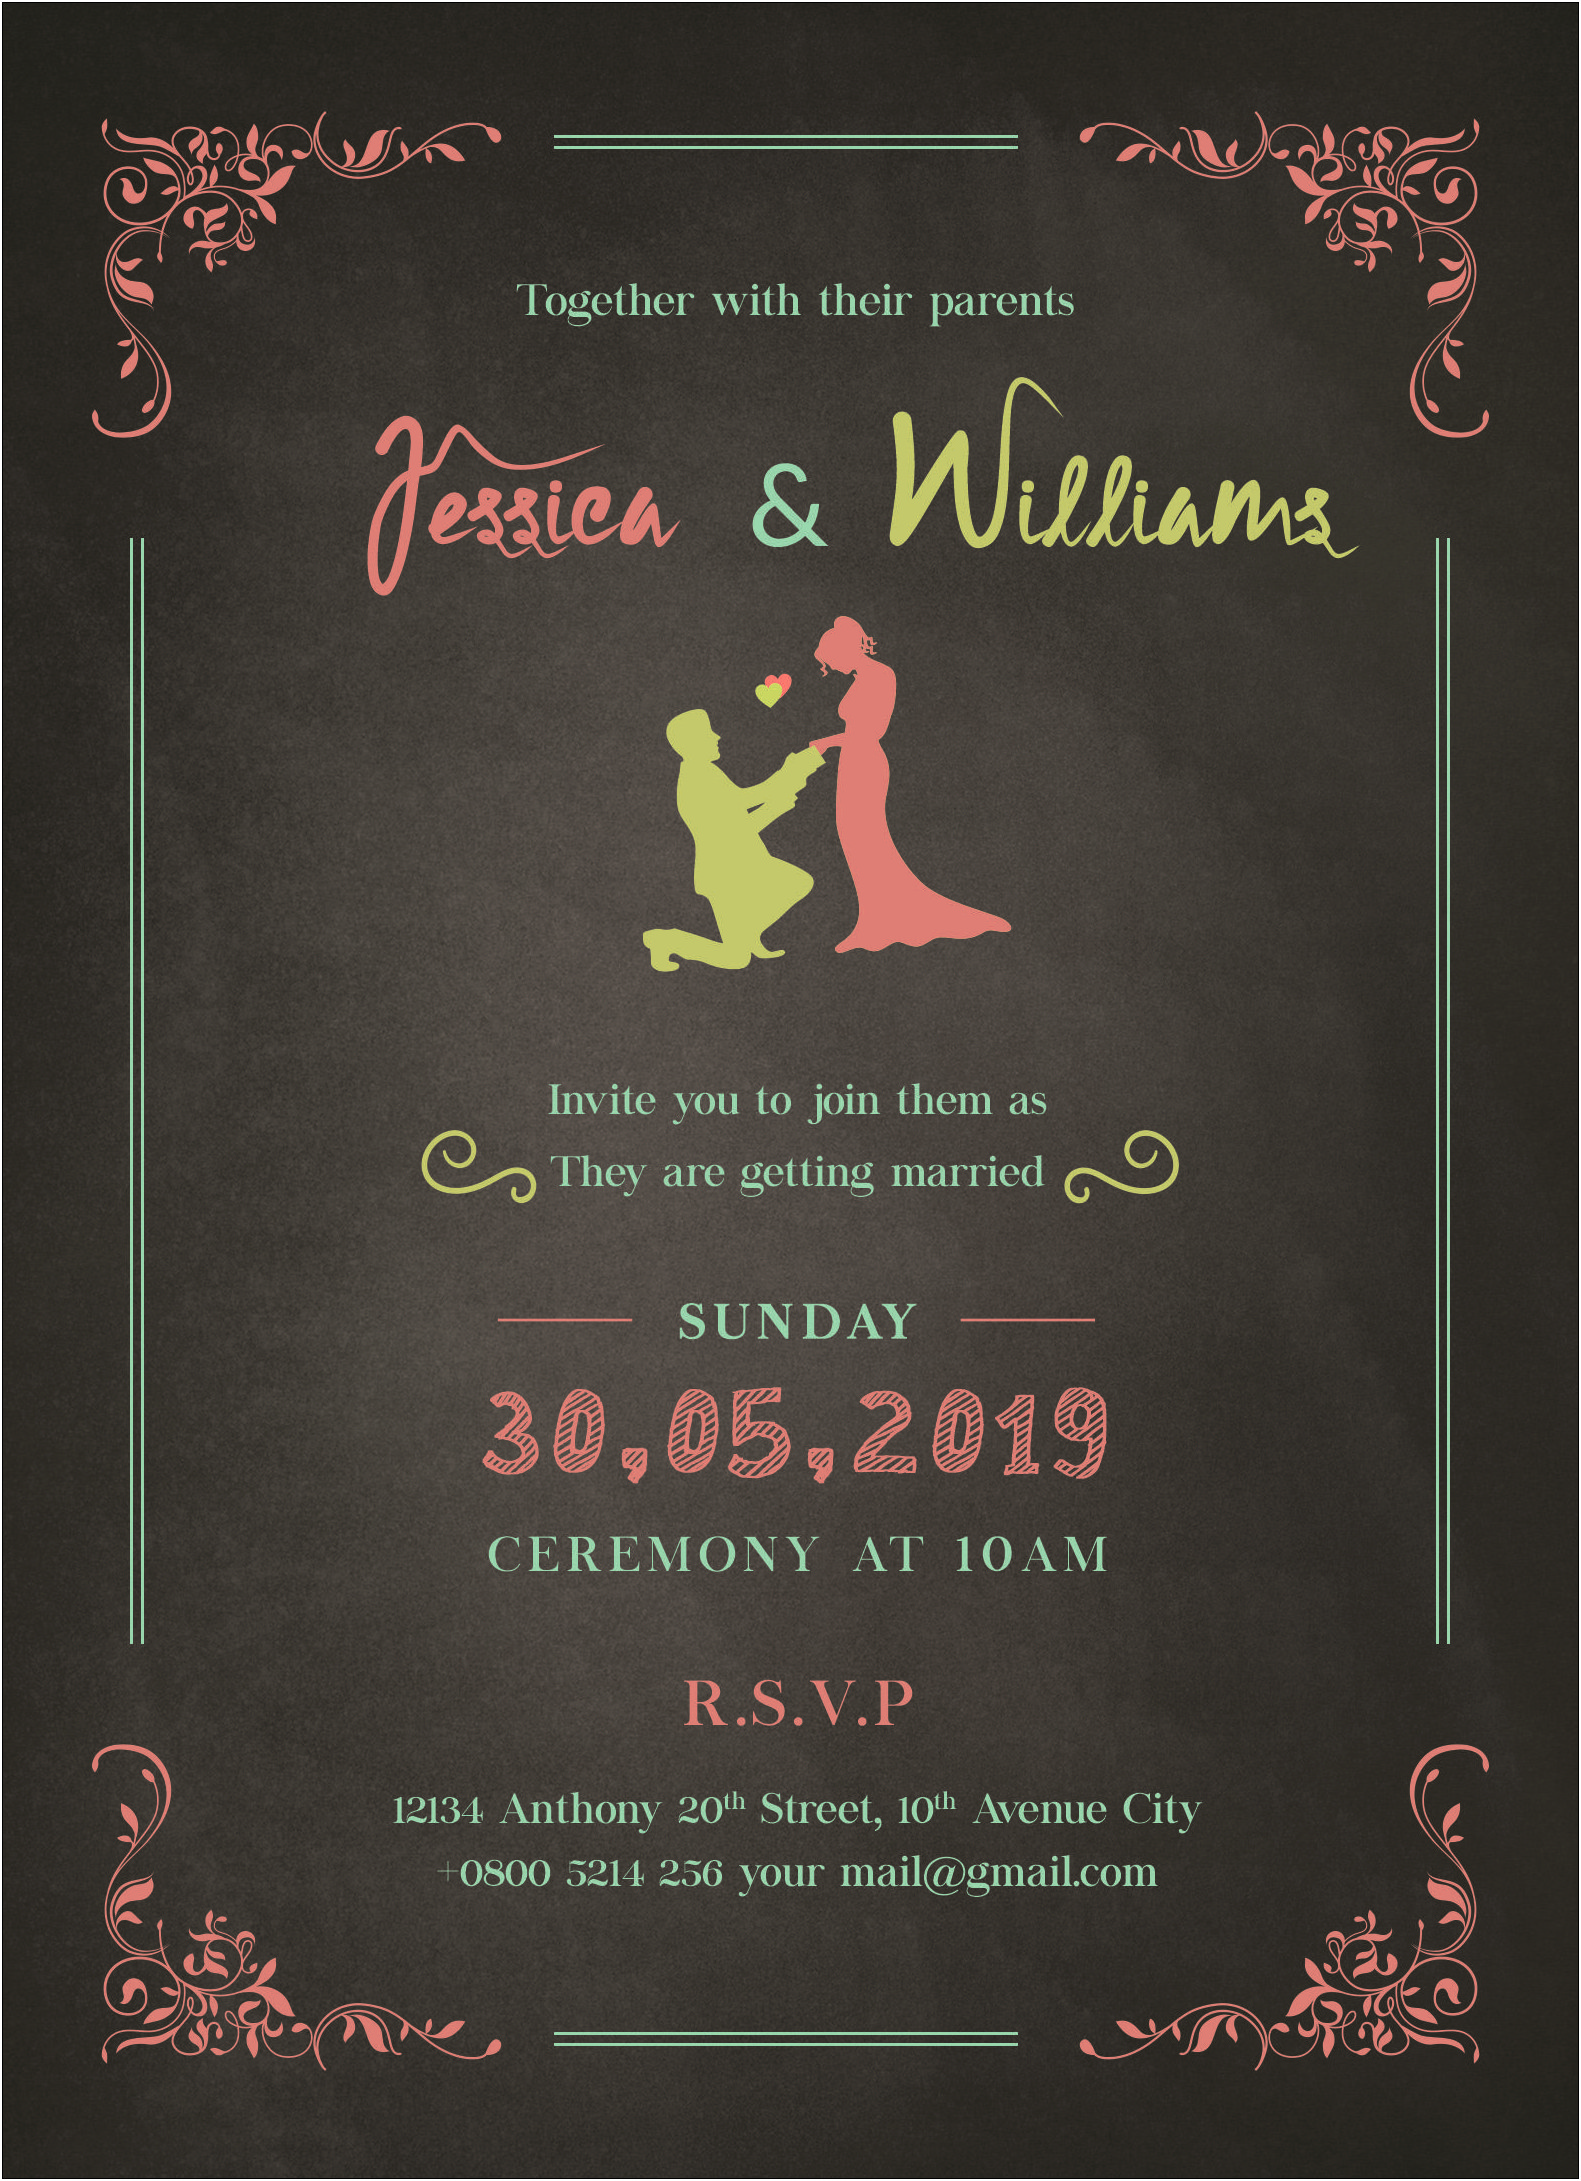 Invitation Card Template Photoshop Free Download